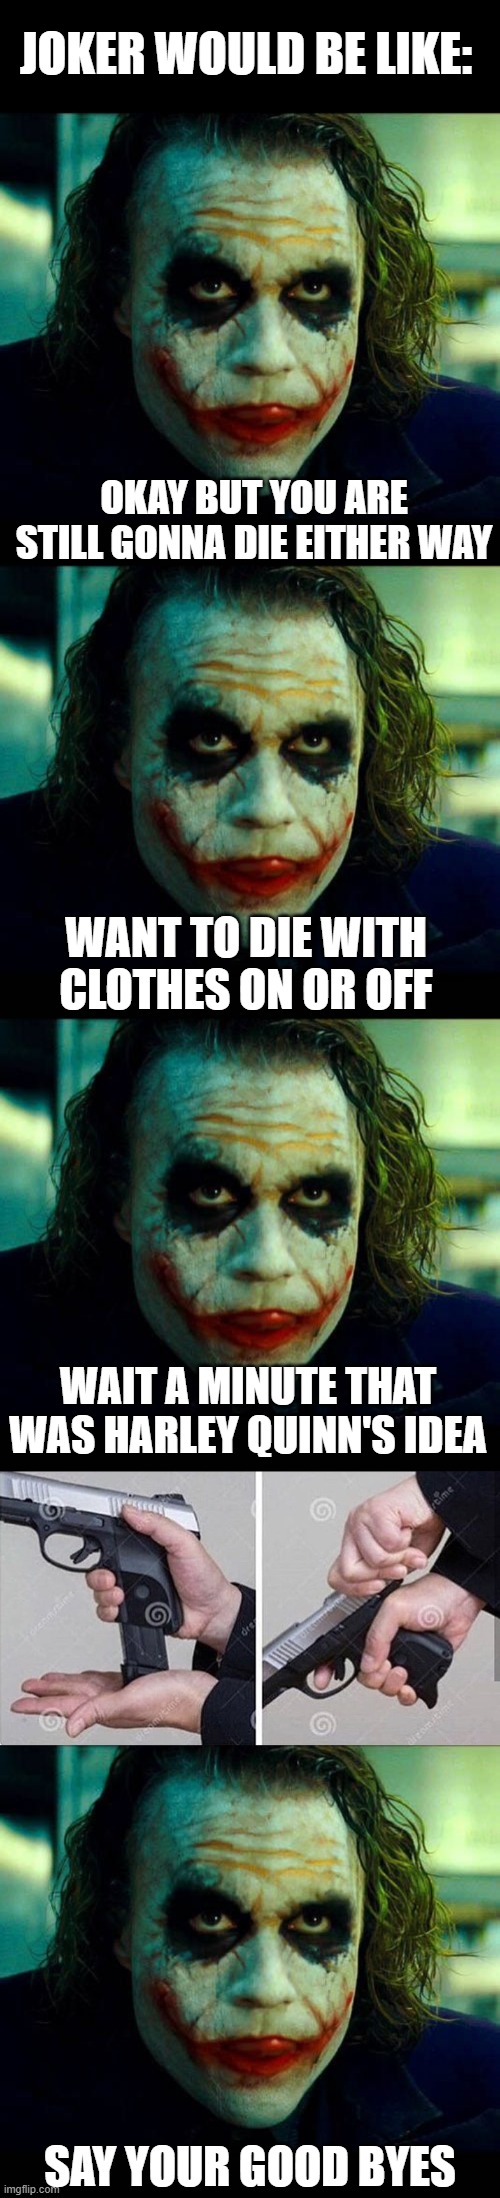 JOKER WOULD BE LIKE: OKAY BUT YOU ARE STILL GONNA DIE EITHER WAY WANT TO DIE WITH CLOTHES ON OR OFF WAIT A MINUTE THAT WAS HARLEY QUINN'S ID | image tagged in joker it's simple we kill the batman,loading gun | made w/ Imgflip meme maker